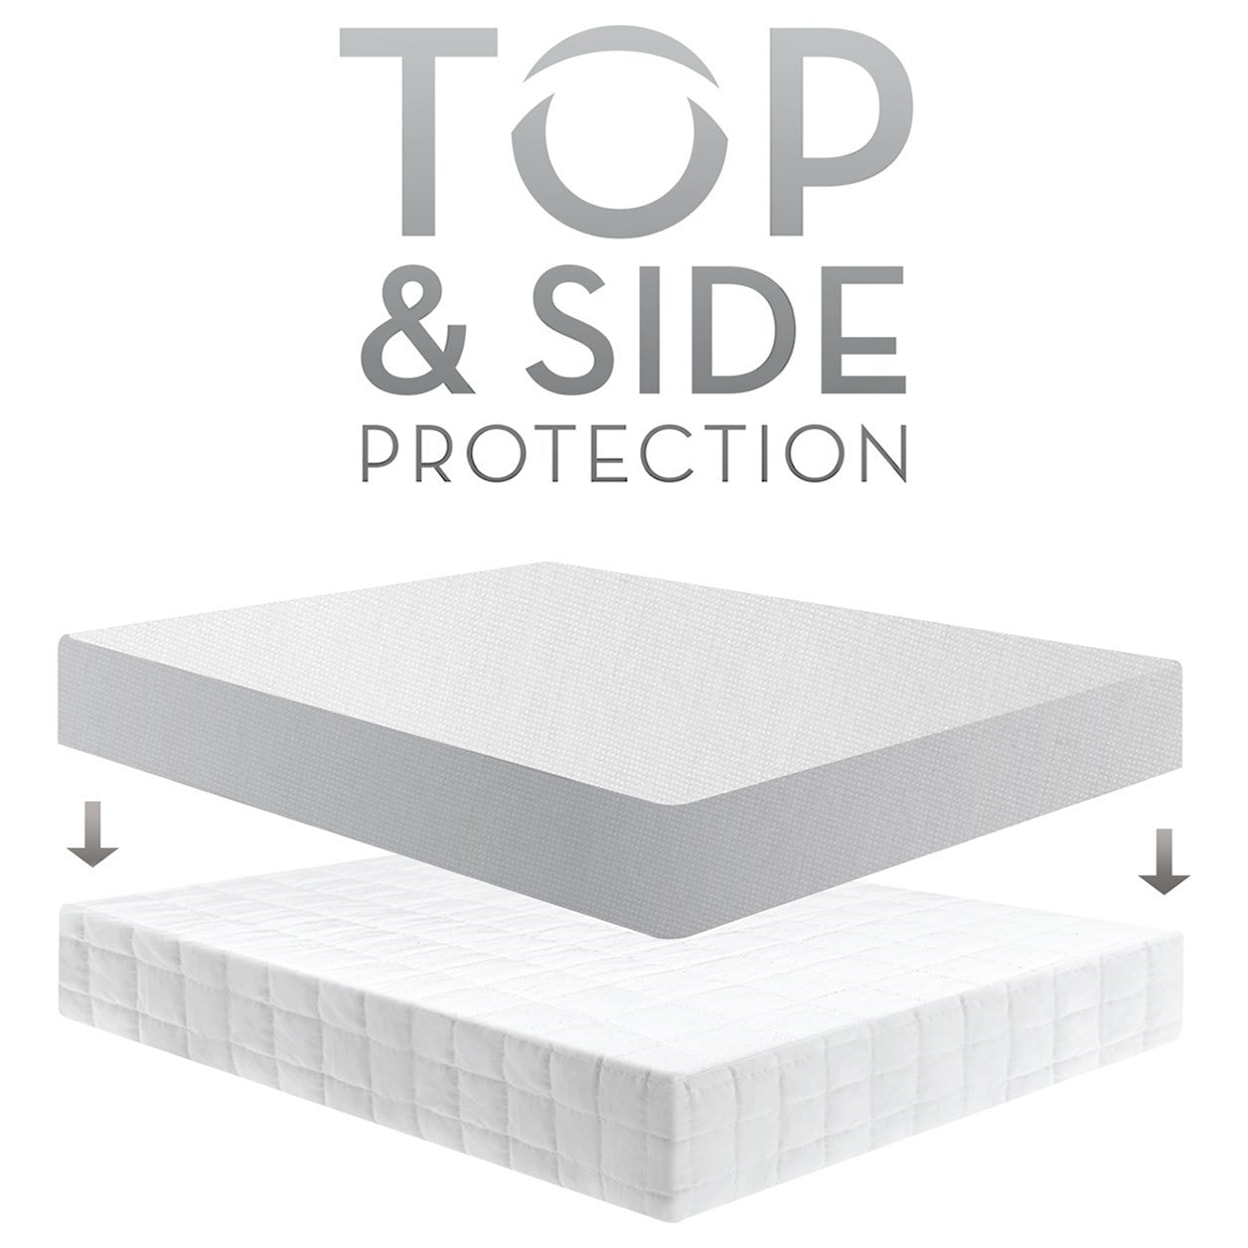 Malouf Five 5ided Omniphase Split King Five 5ided Mattress Protector